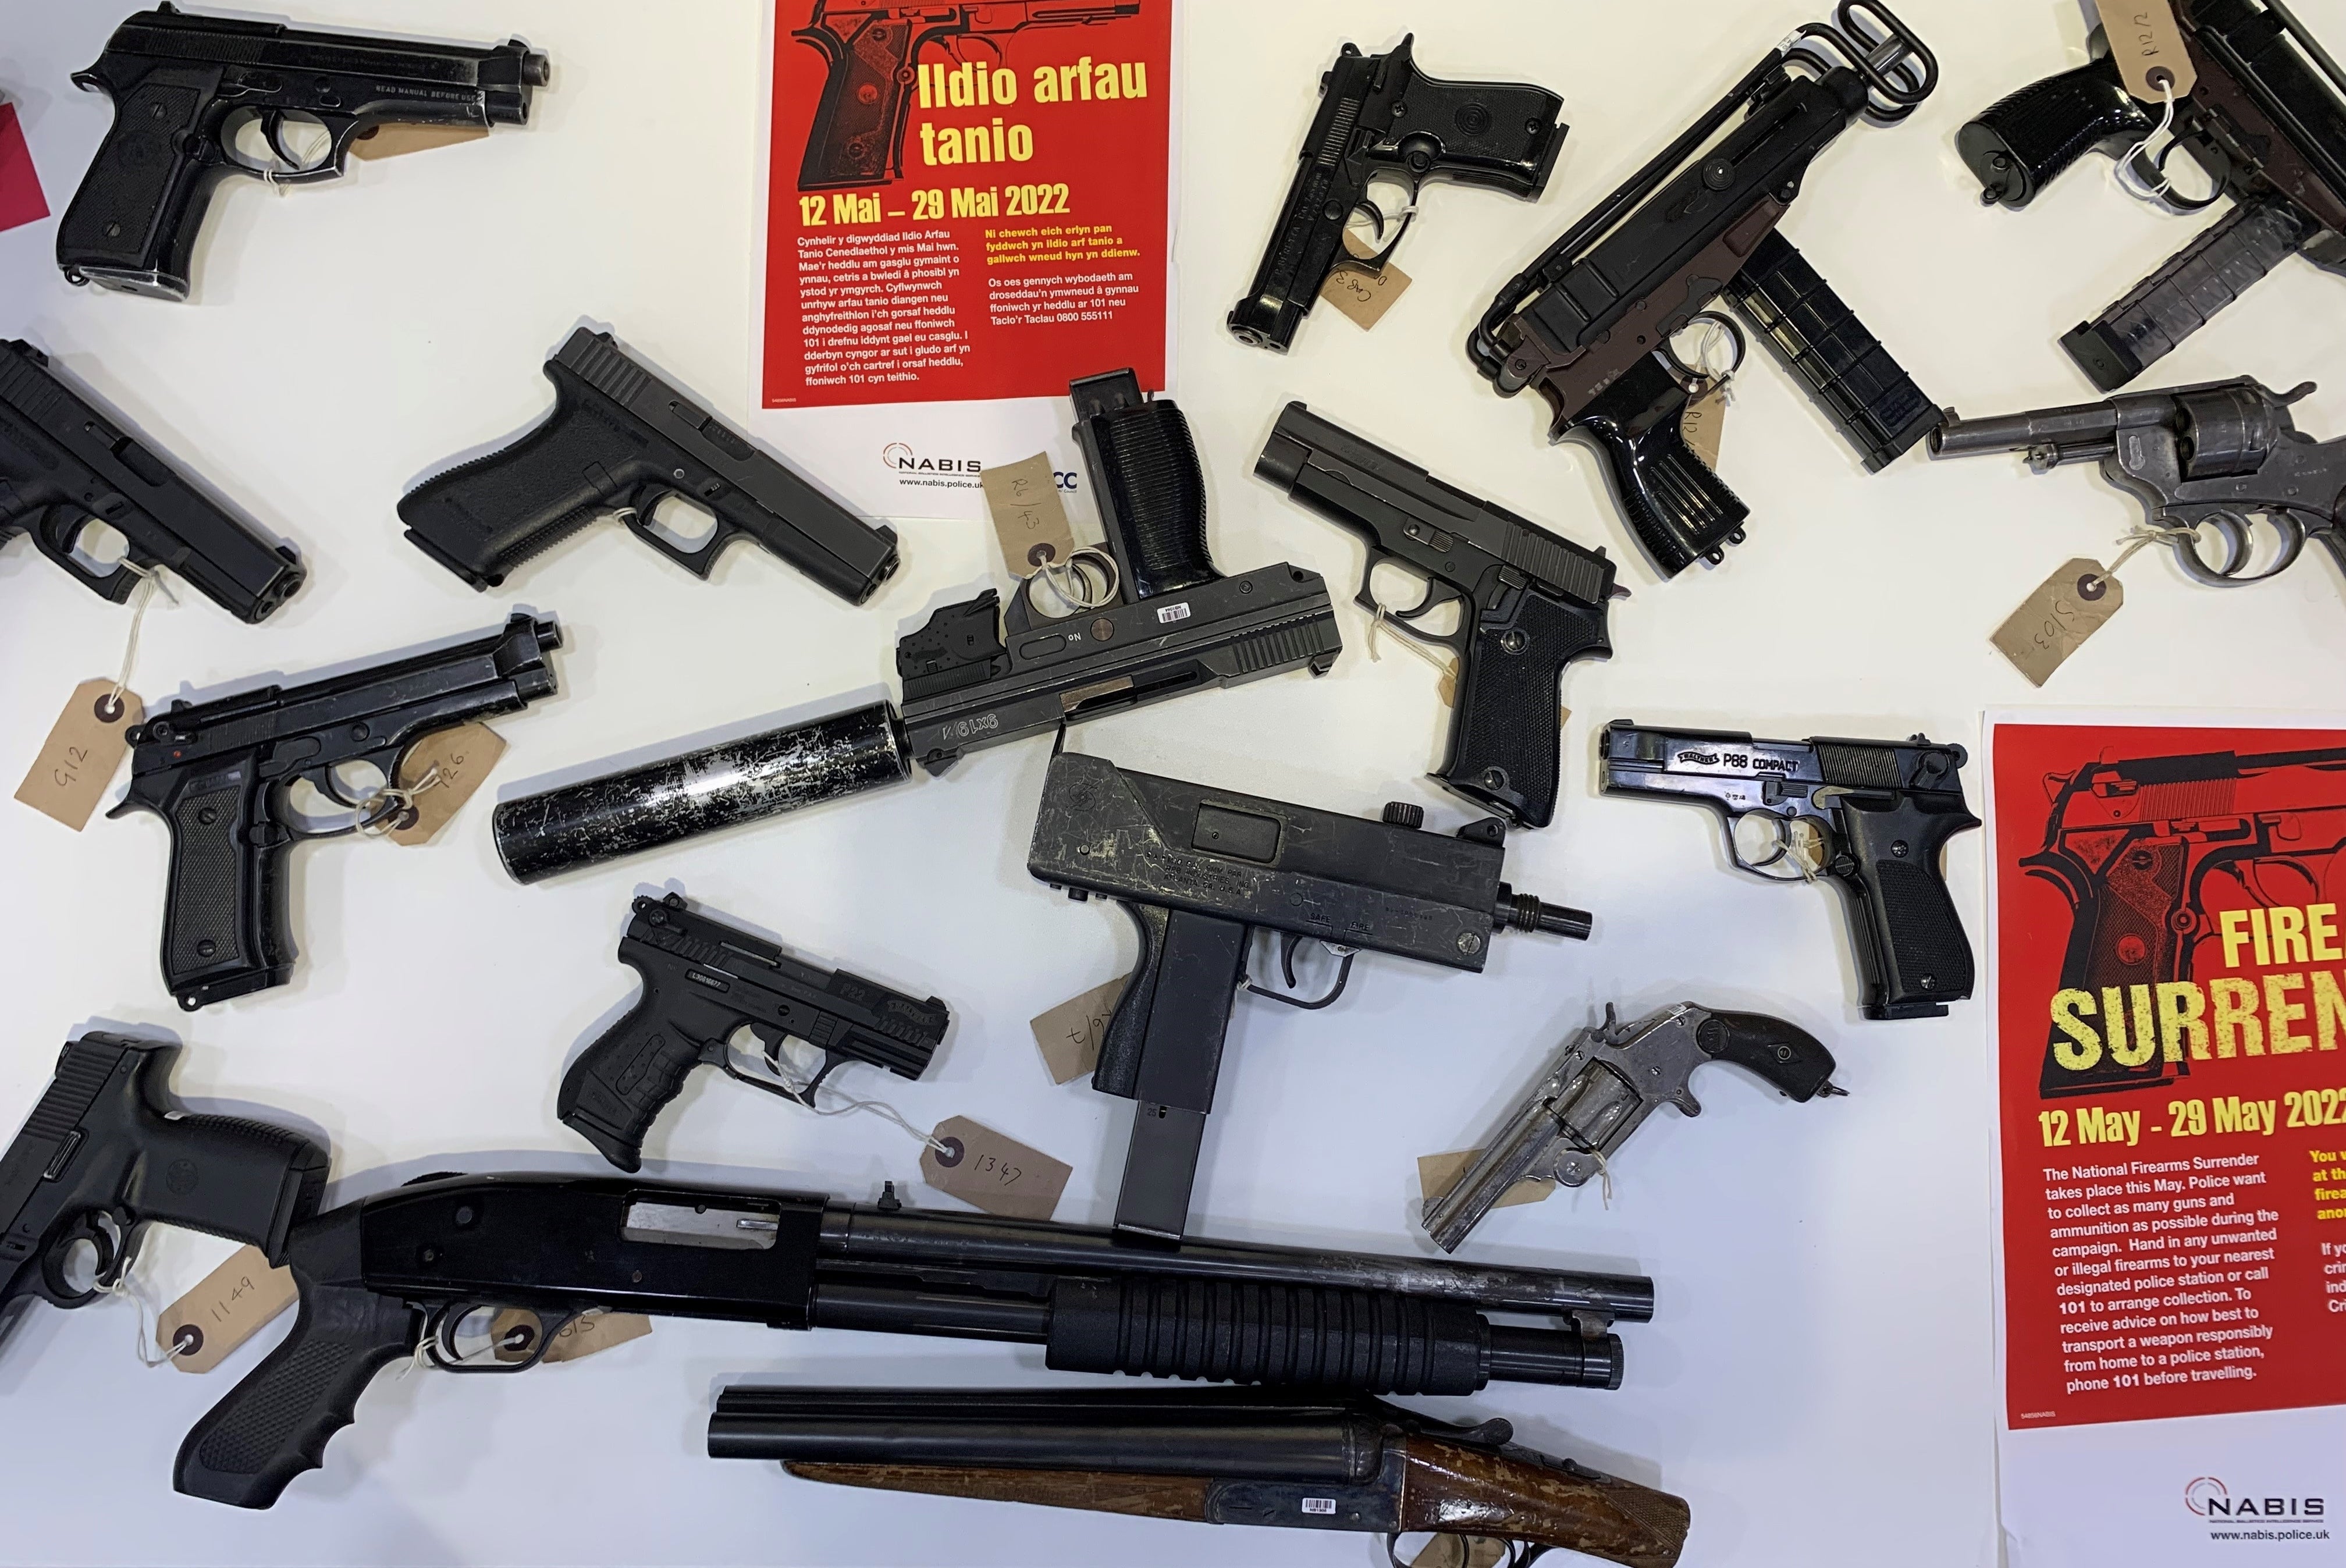 Examples of weaponry. (Richard Vernalls/PA)